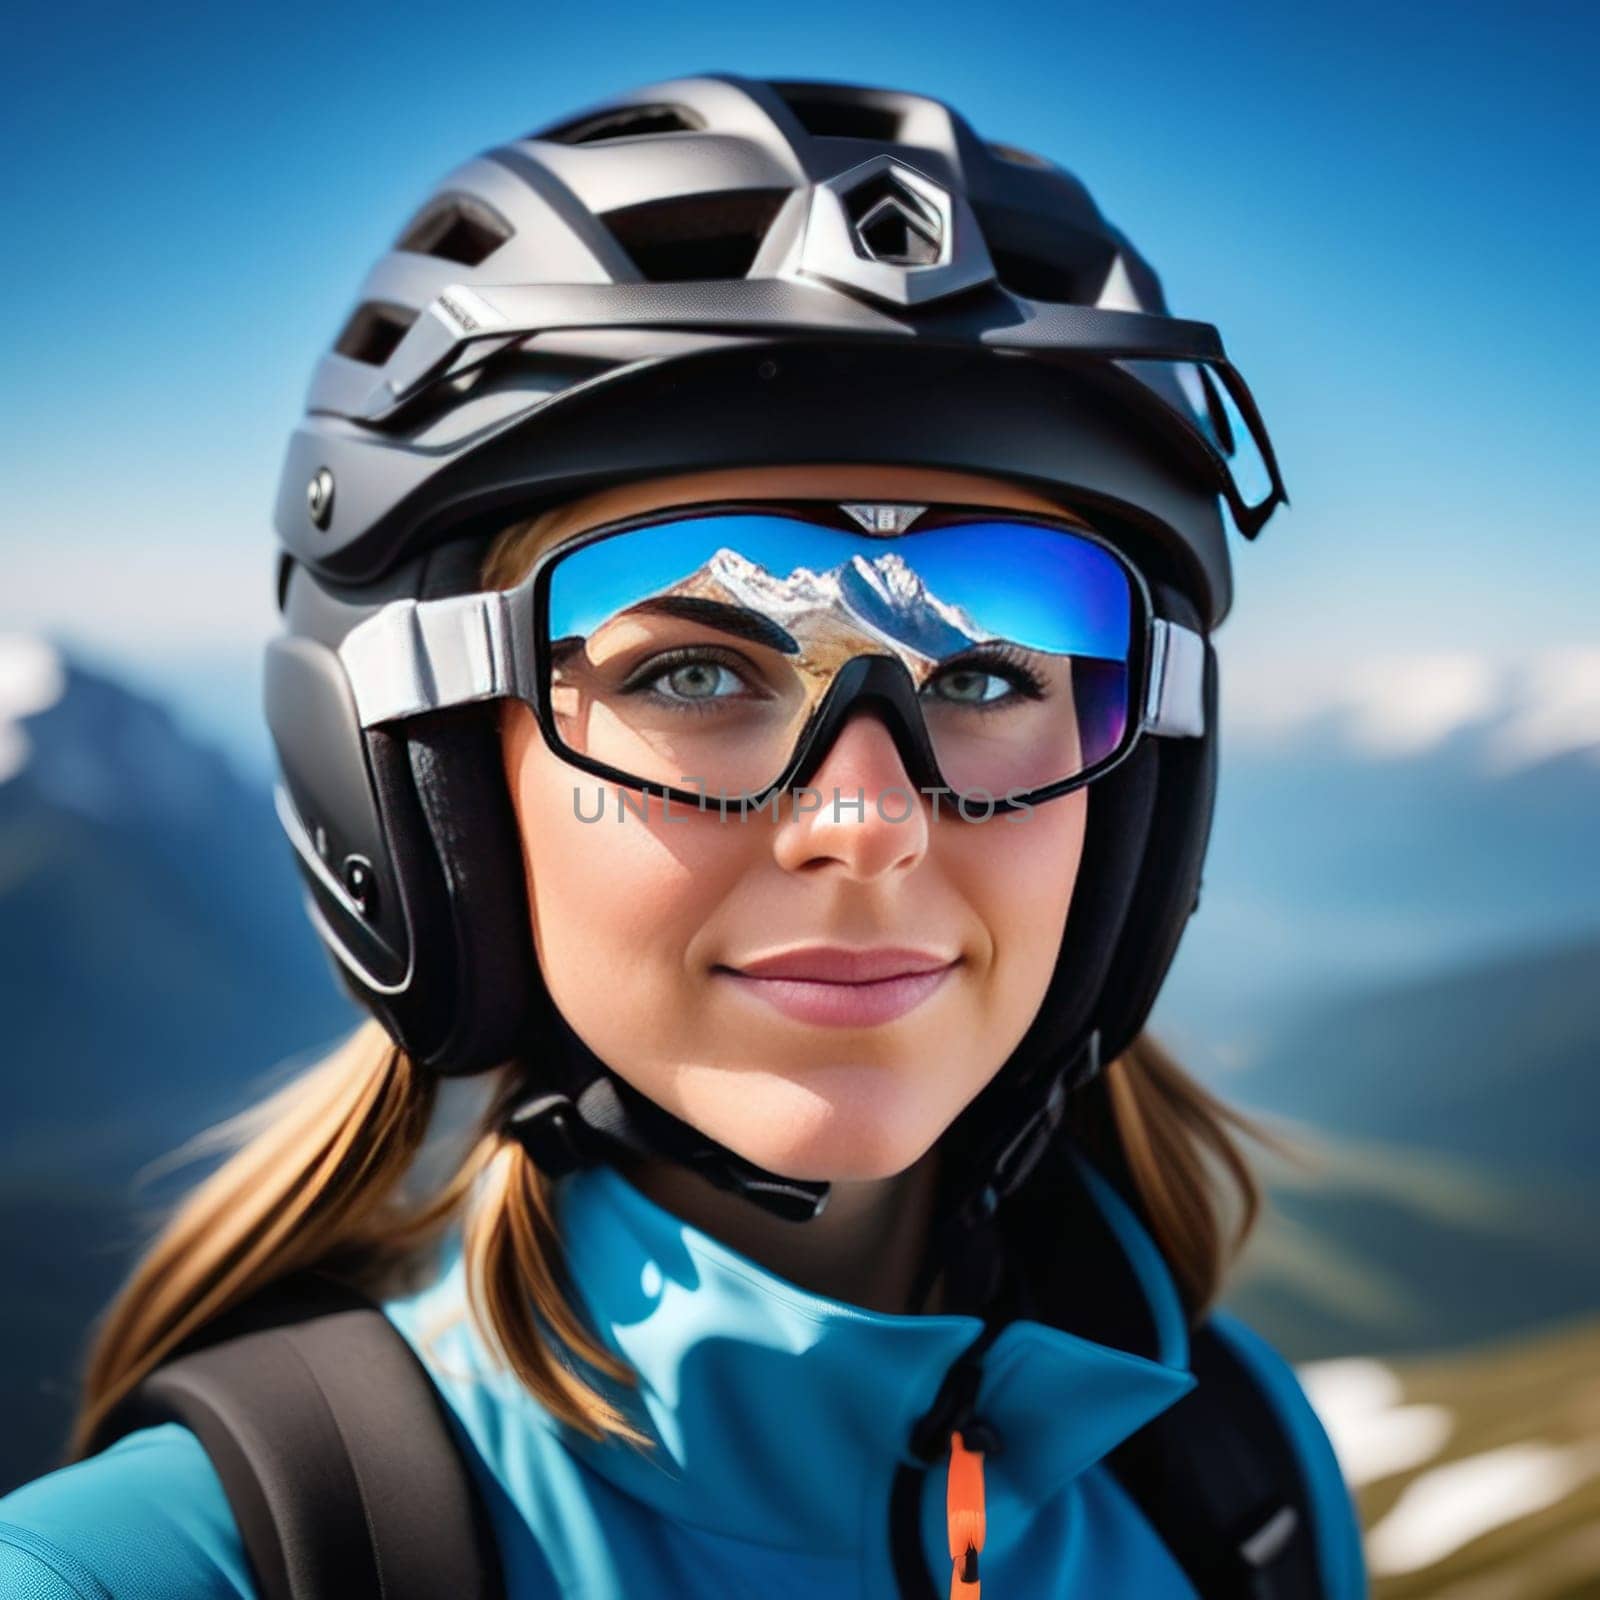 Woman wearing helmet and sunglasses glasses stands confidently before towering mountain backdrop ready for adventure, exploration.She may be gearing up for bicycle ride or some other outdoor activity. by Angelsmoon